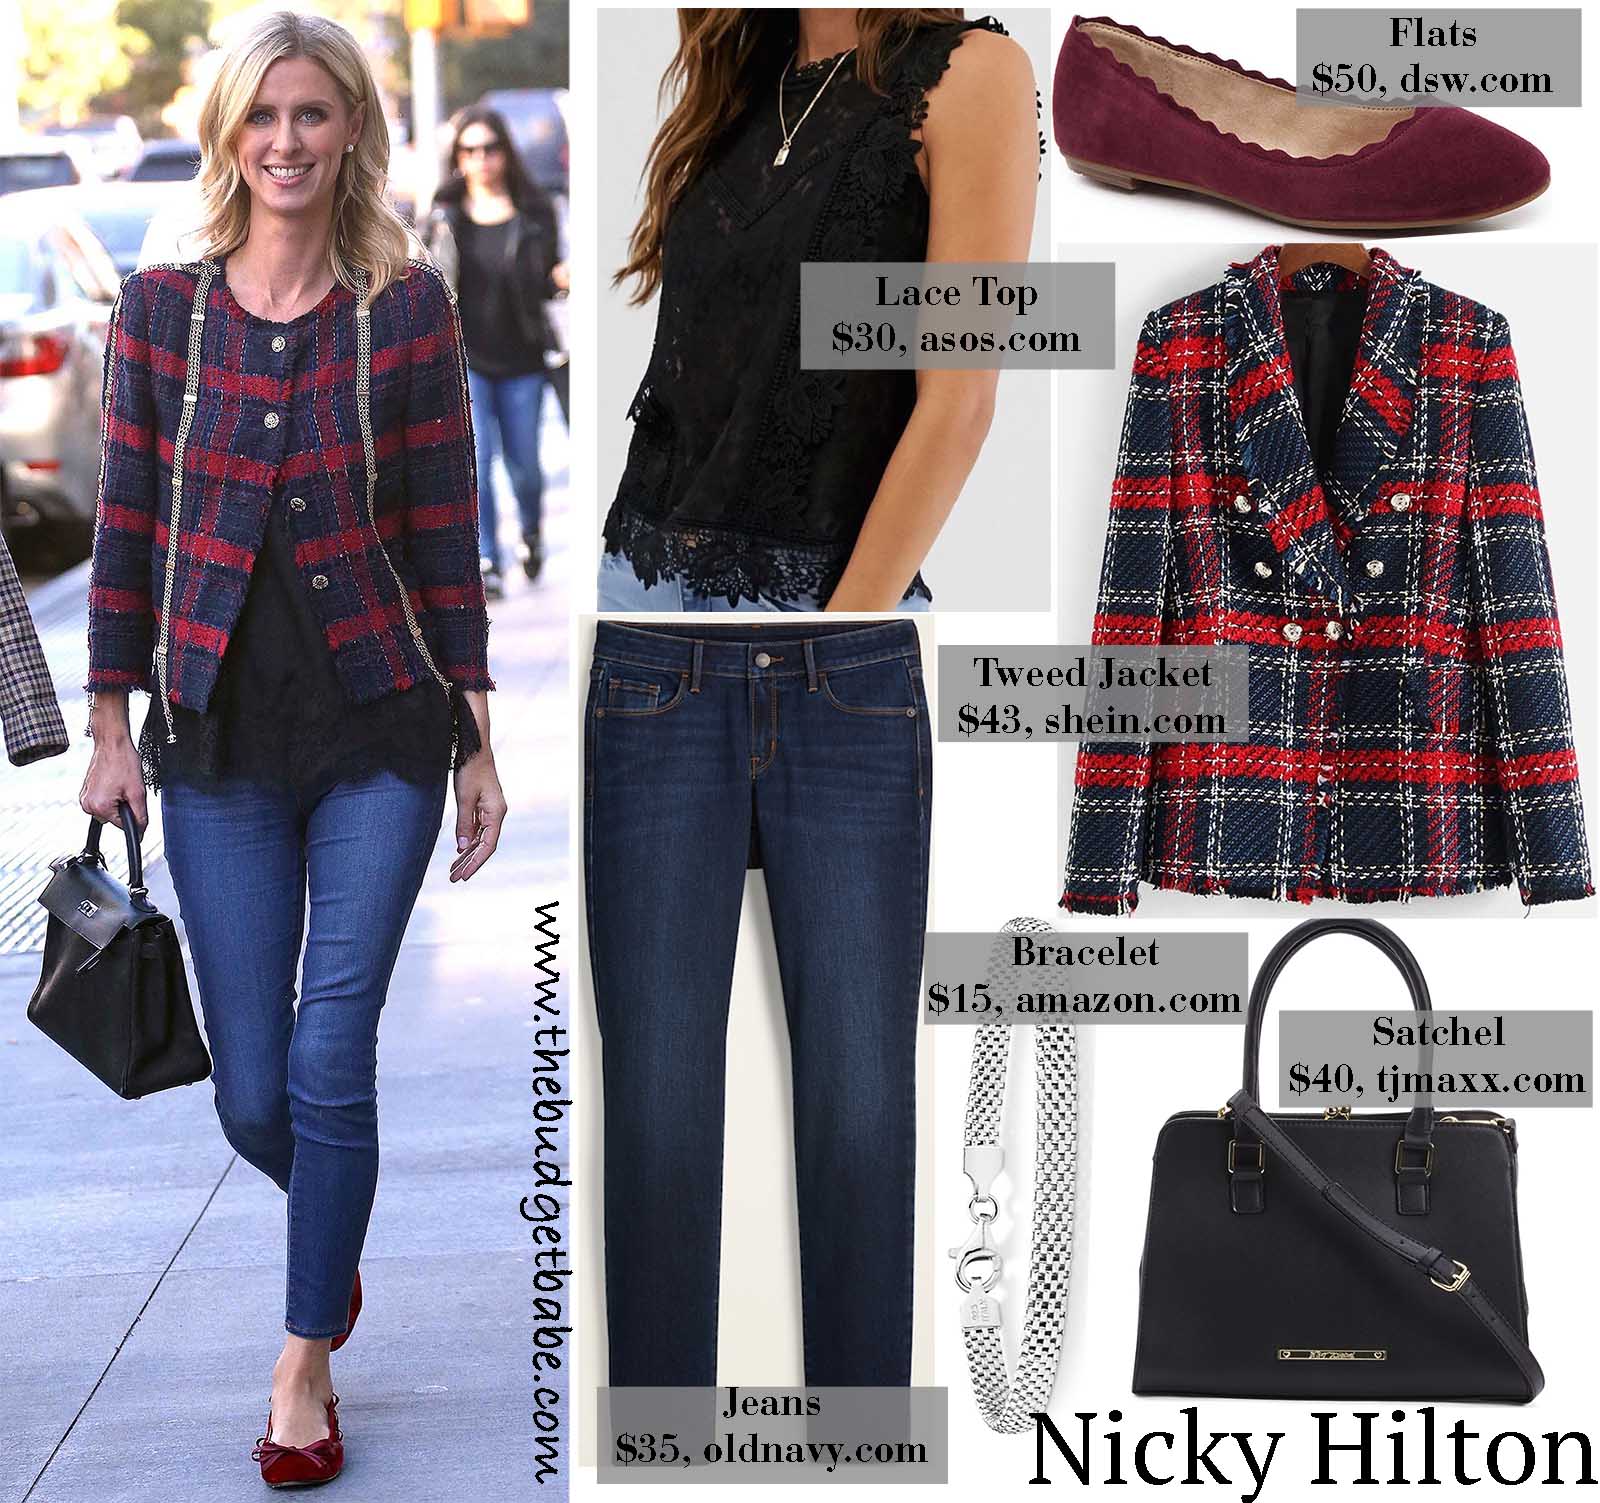 Nicky Hilton's tweed jacket is perfect for winter!